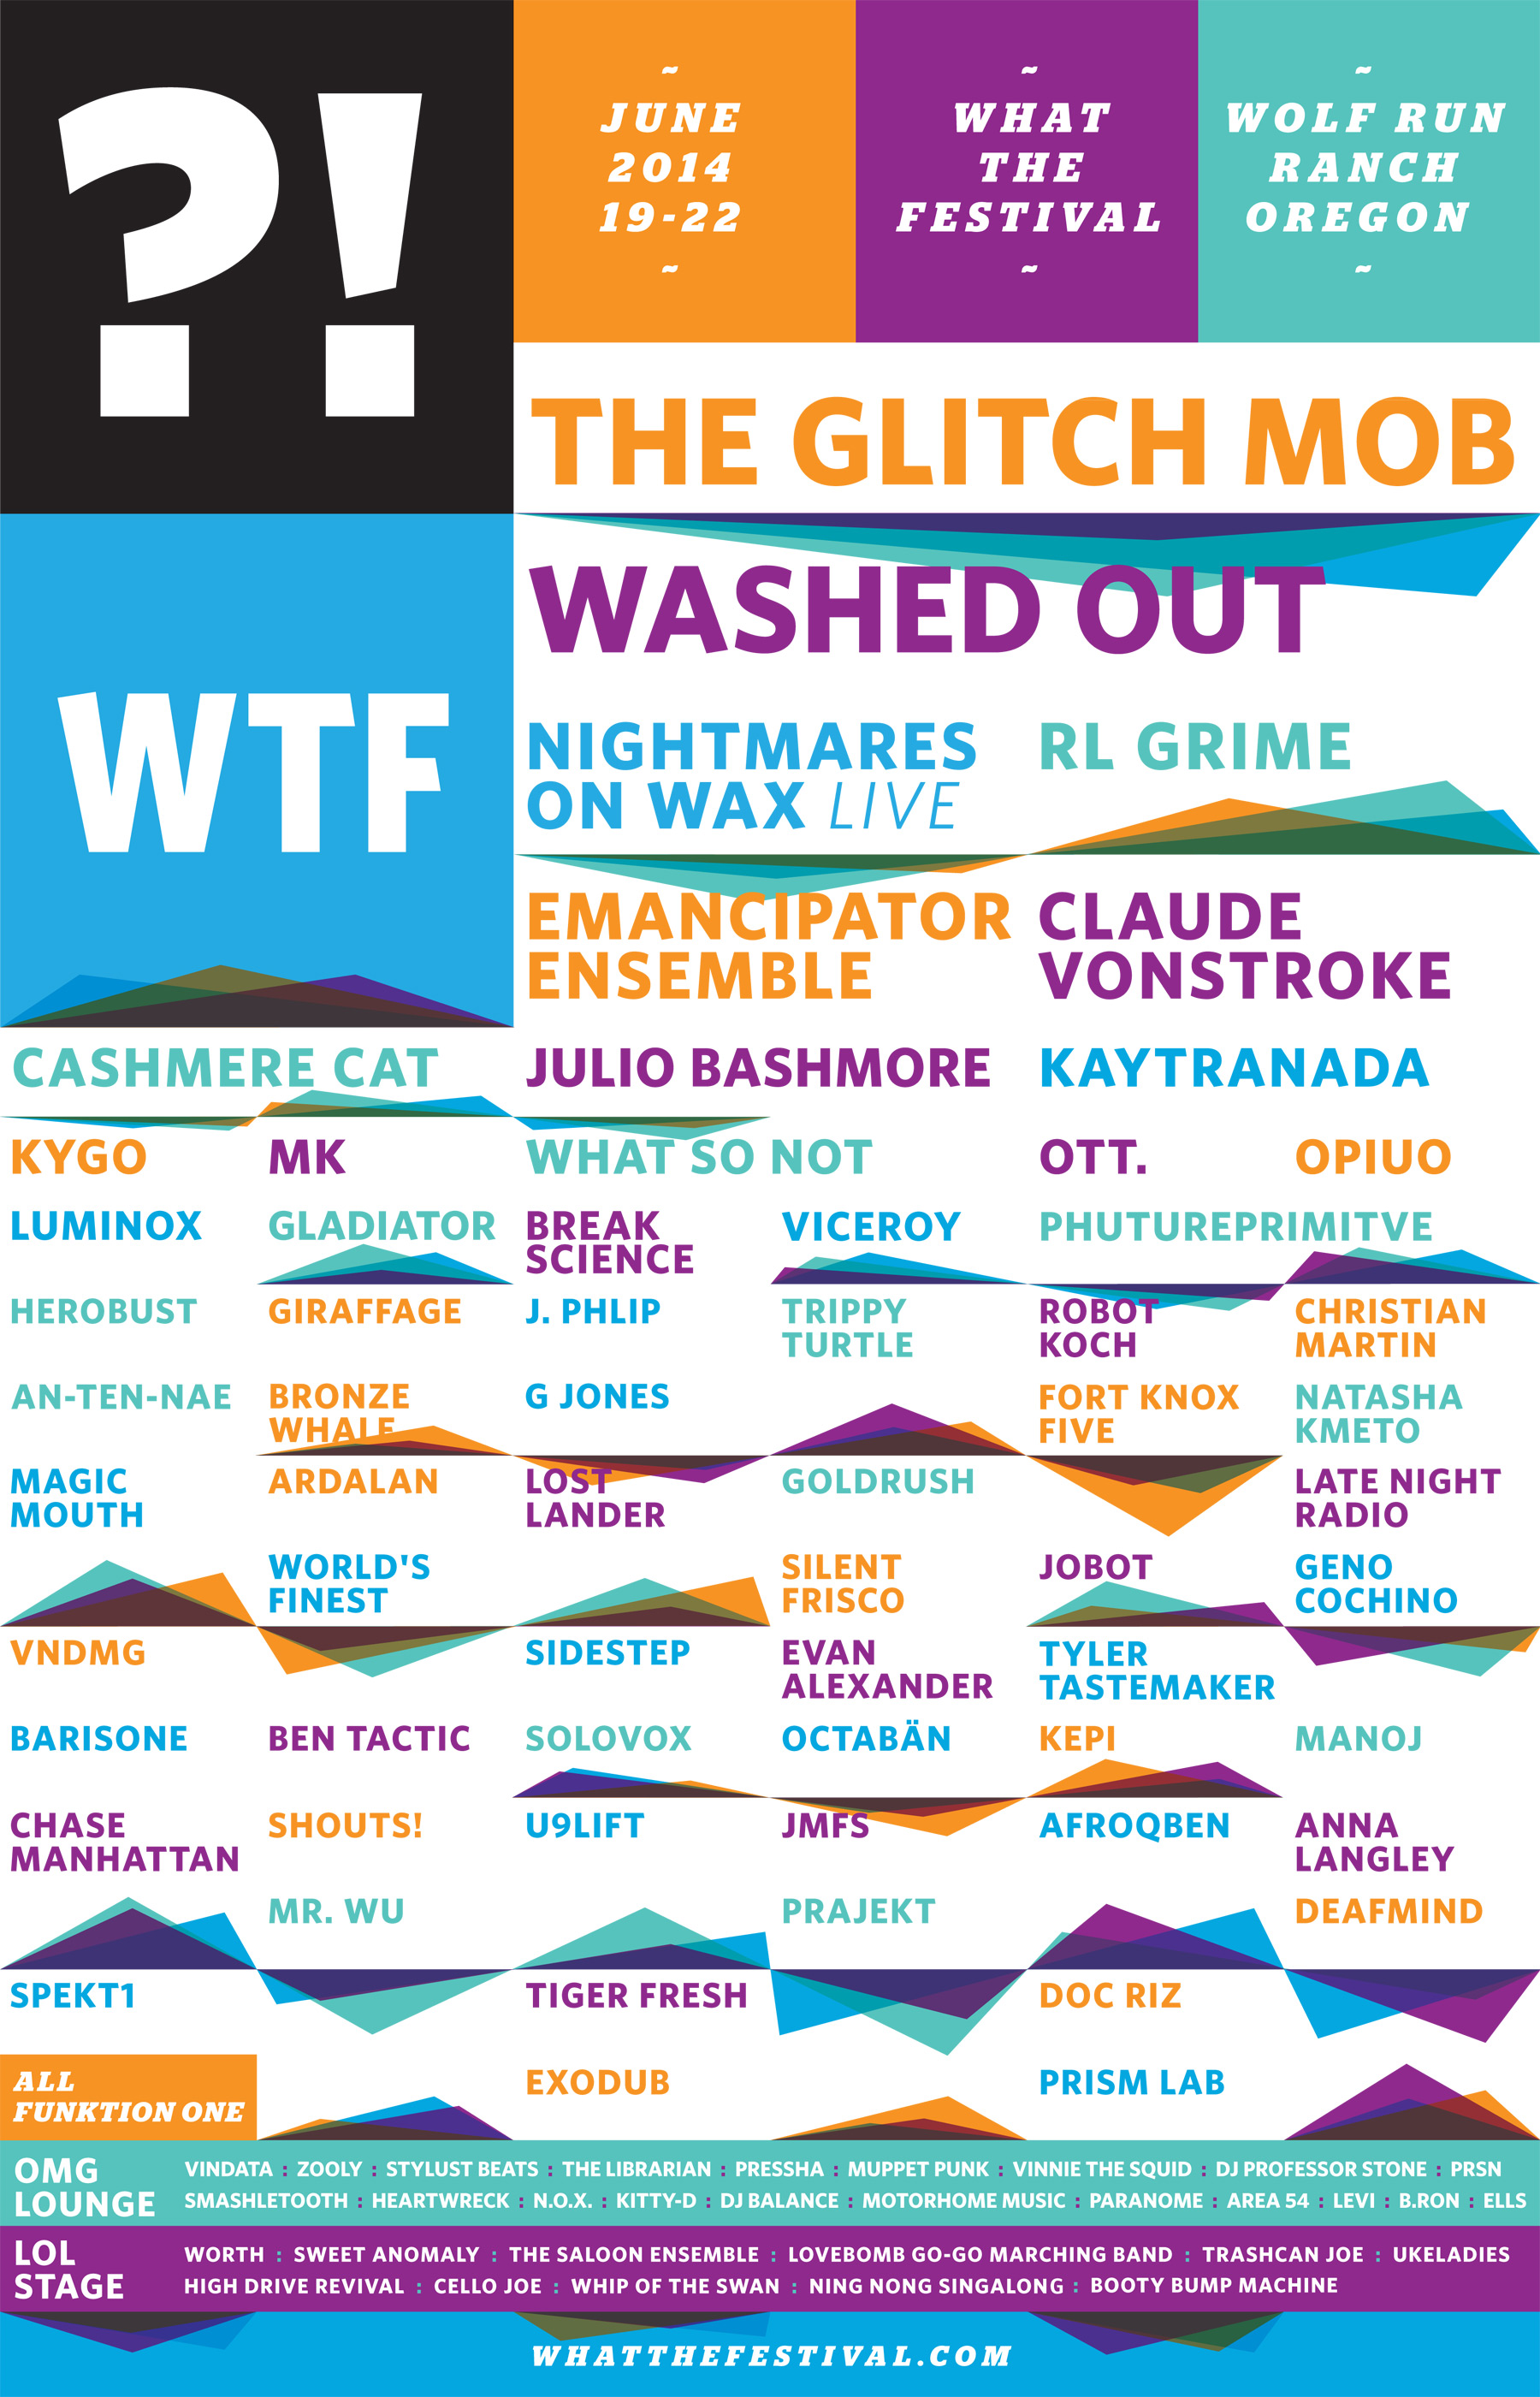 WTF Lineup additions